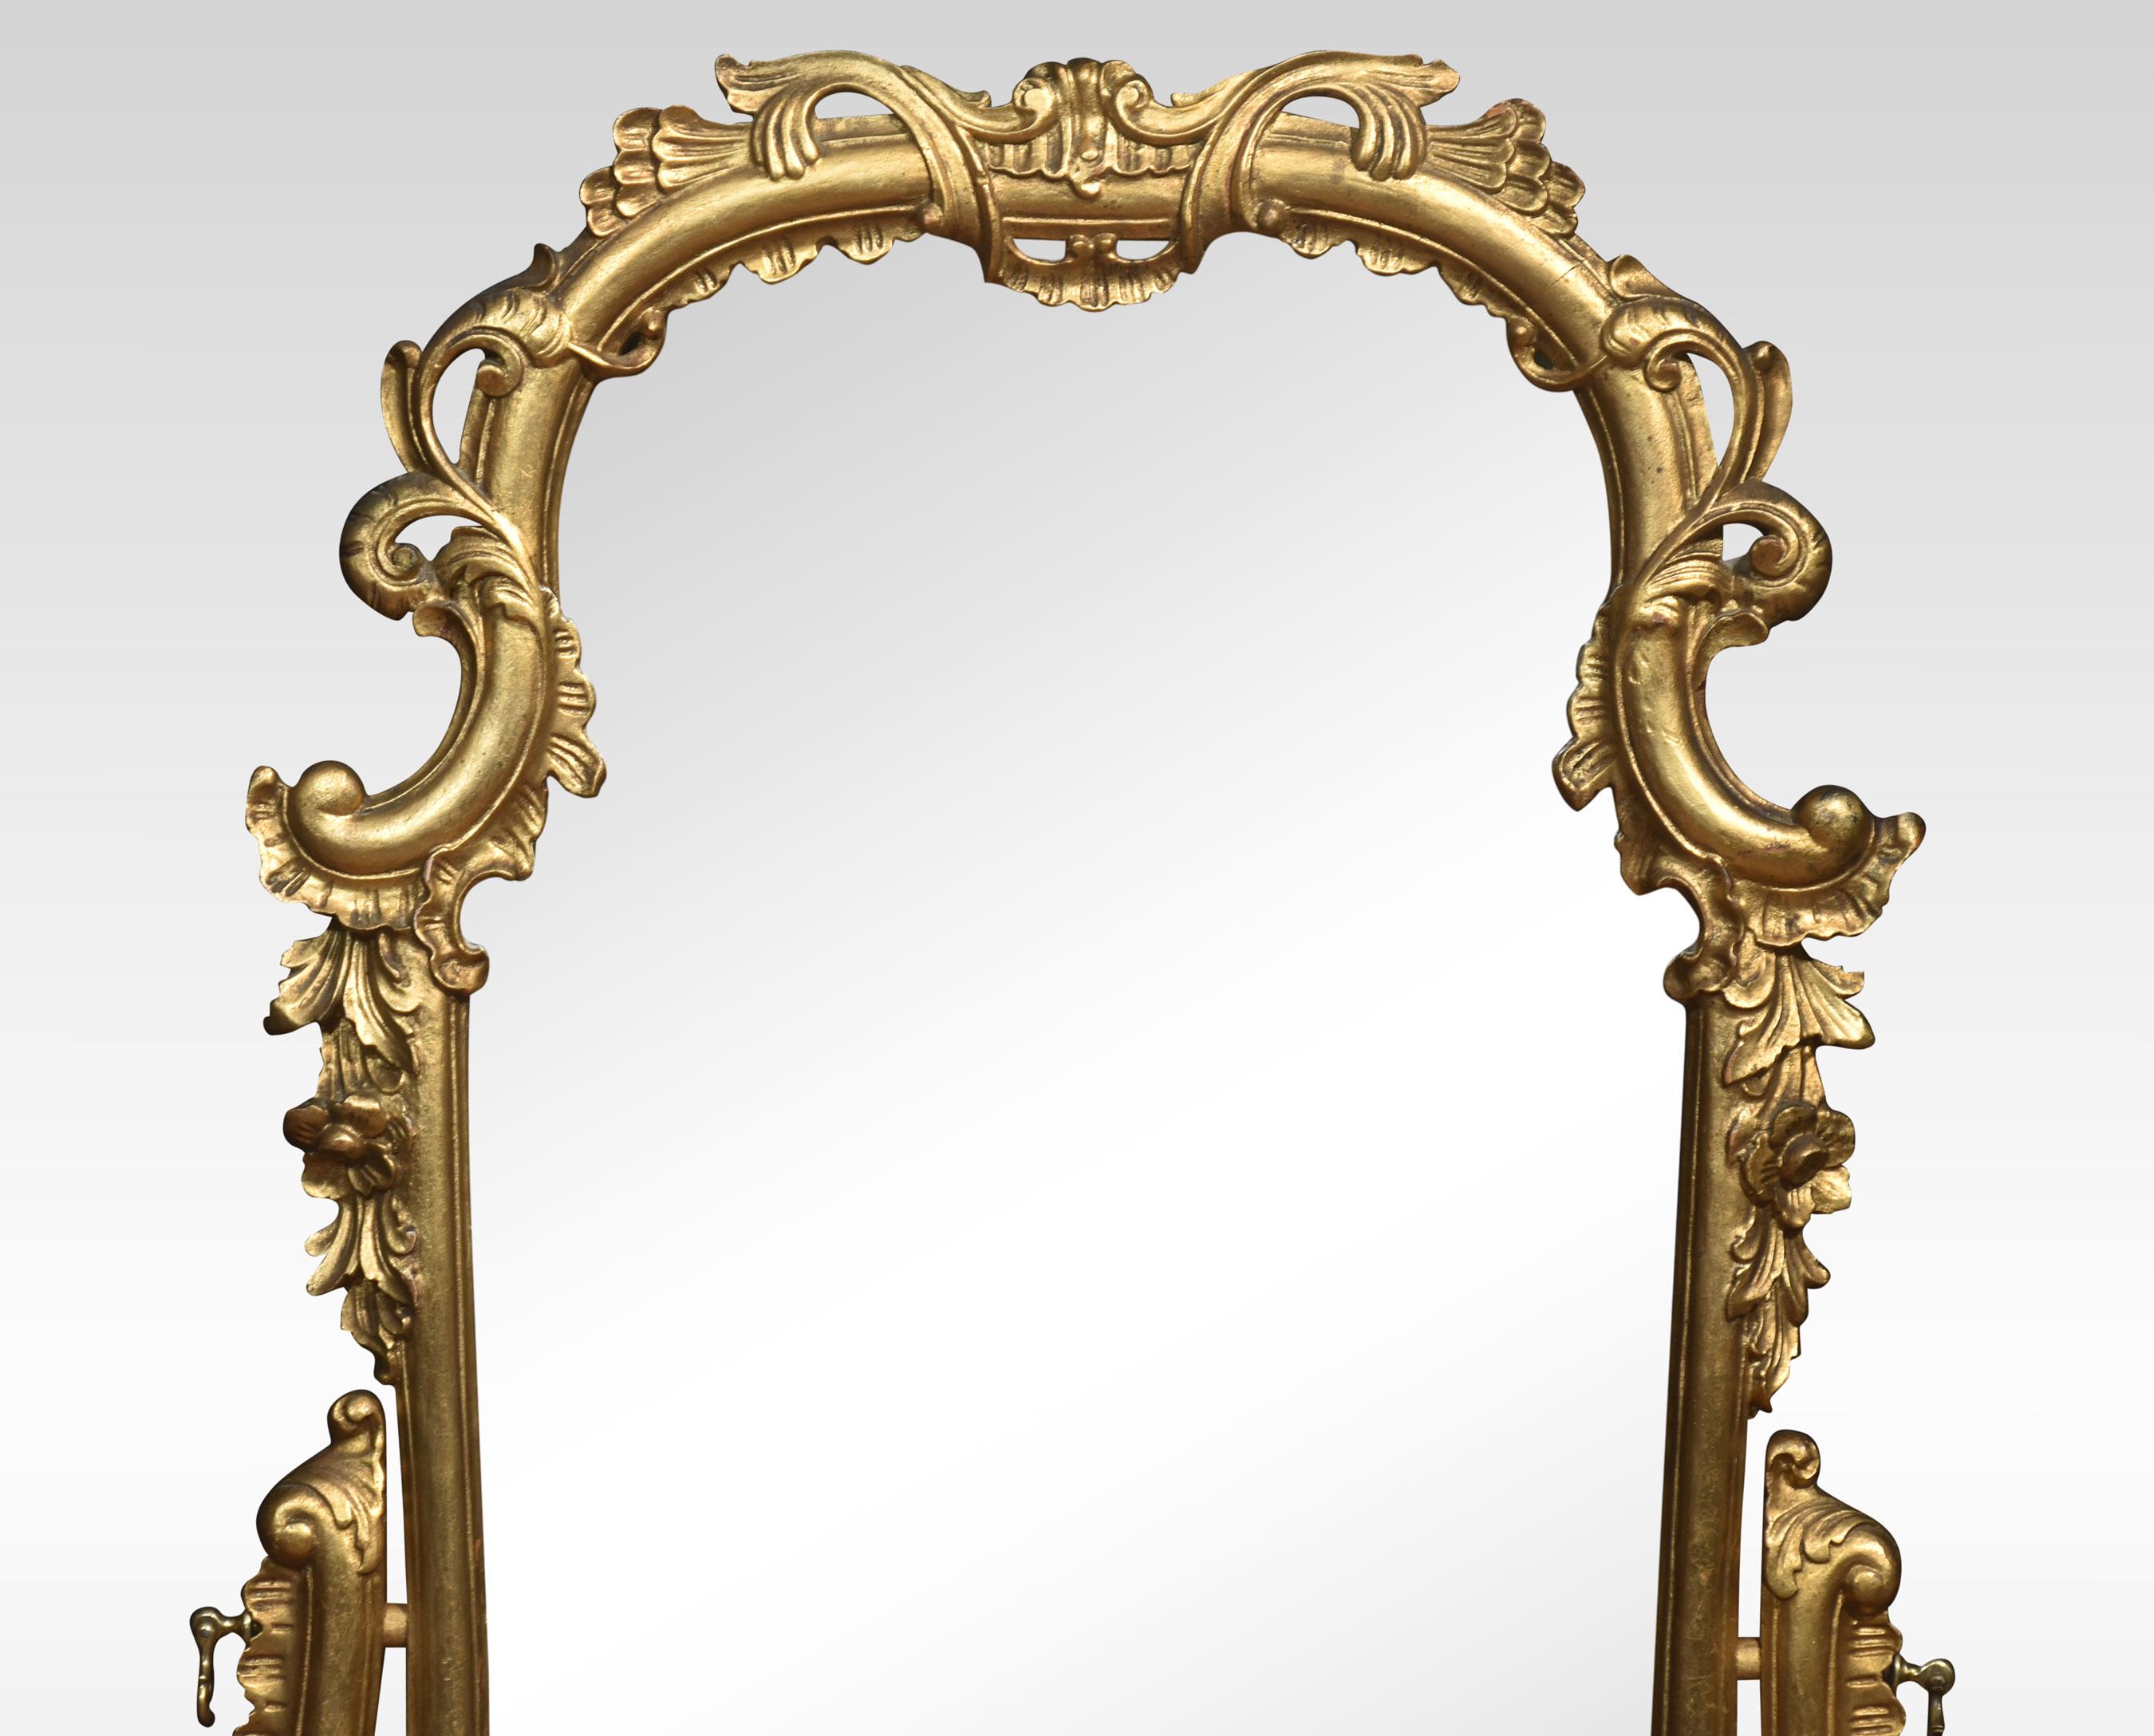 Italian giltwood and figured walnut dressing mirror of Rococo style, the long scrolled foliate frame mounted on scrolled supports, over a pair of bombé petite commodes with well-figured tops and a cupboard door below all raised on splayed